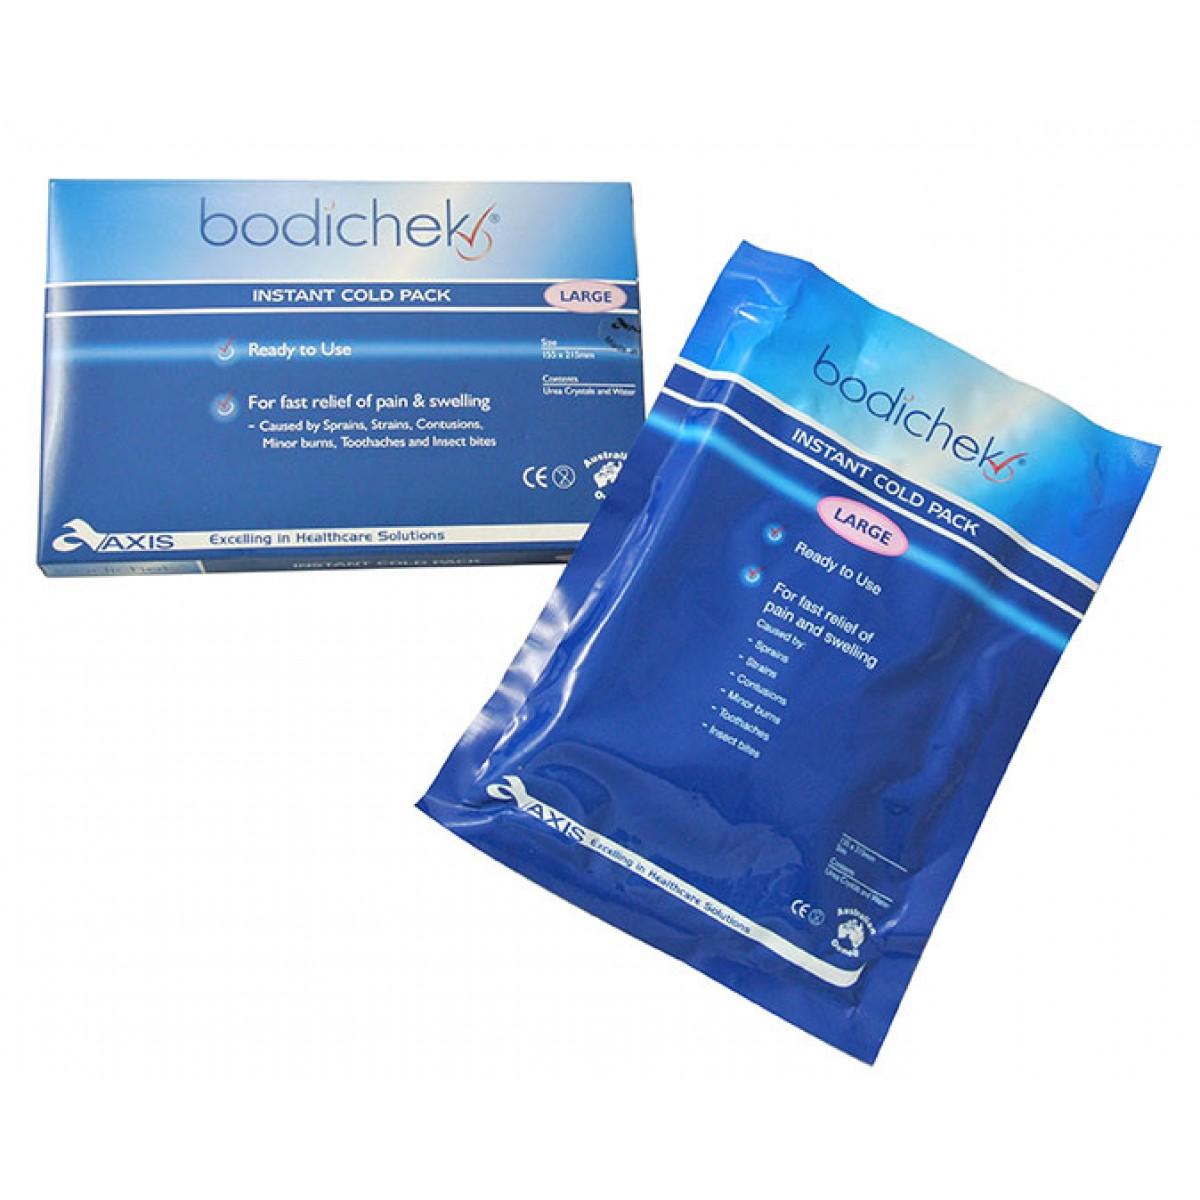 BODICHEK INSTANT COLD PACK LARGE EACH